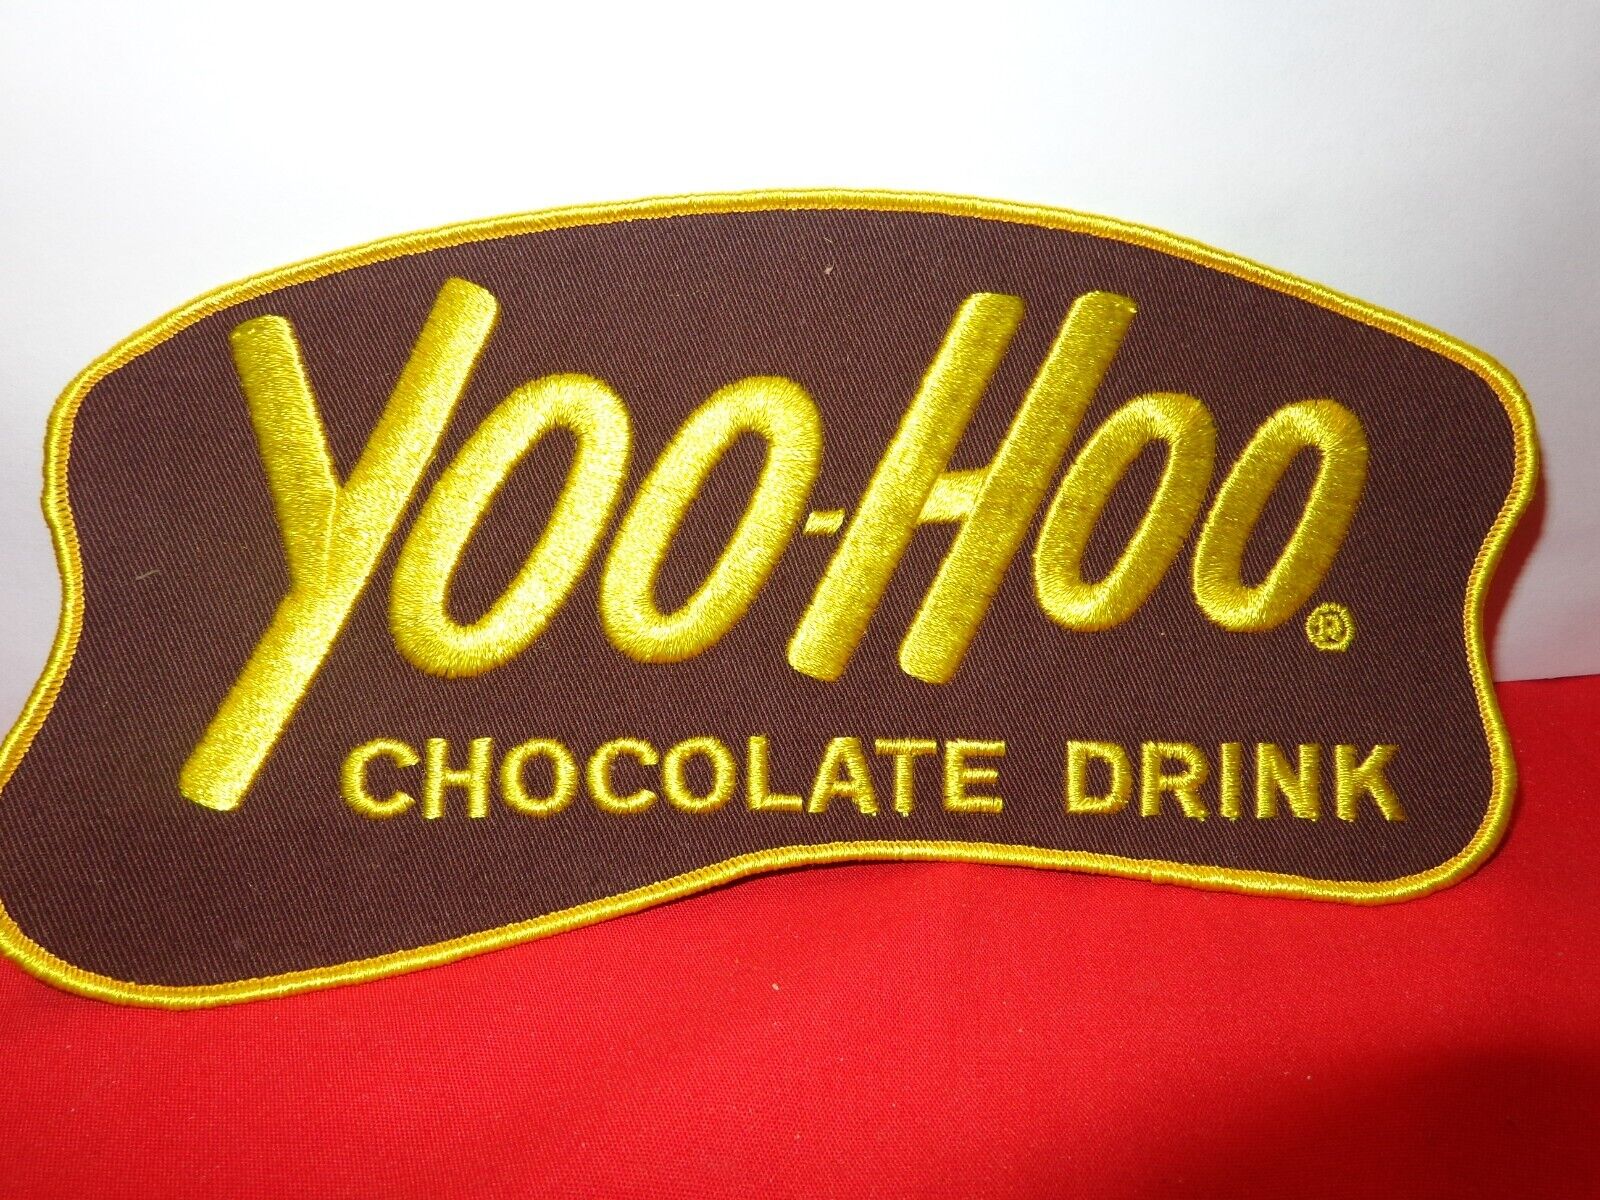 LARGE VINTAGE PATCH YOO-HOO CHOCOLATE DRINK SODA UNIQUE 9 1/2 x 4 1/2 in # Z 101